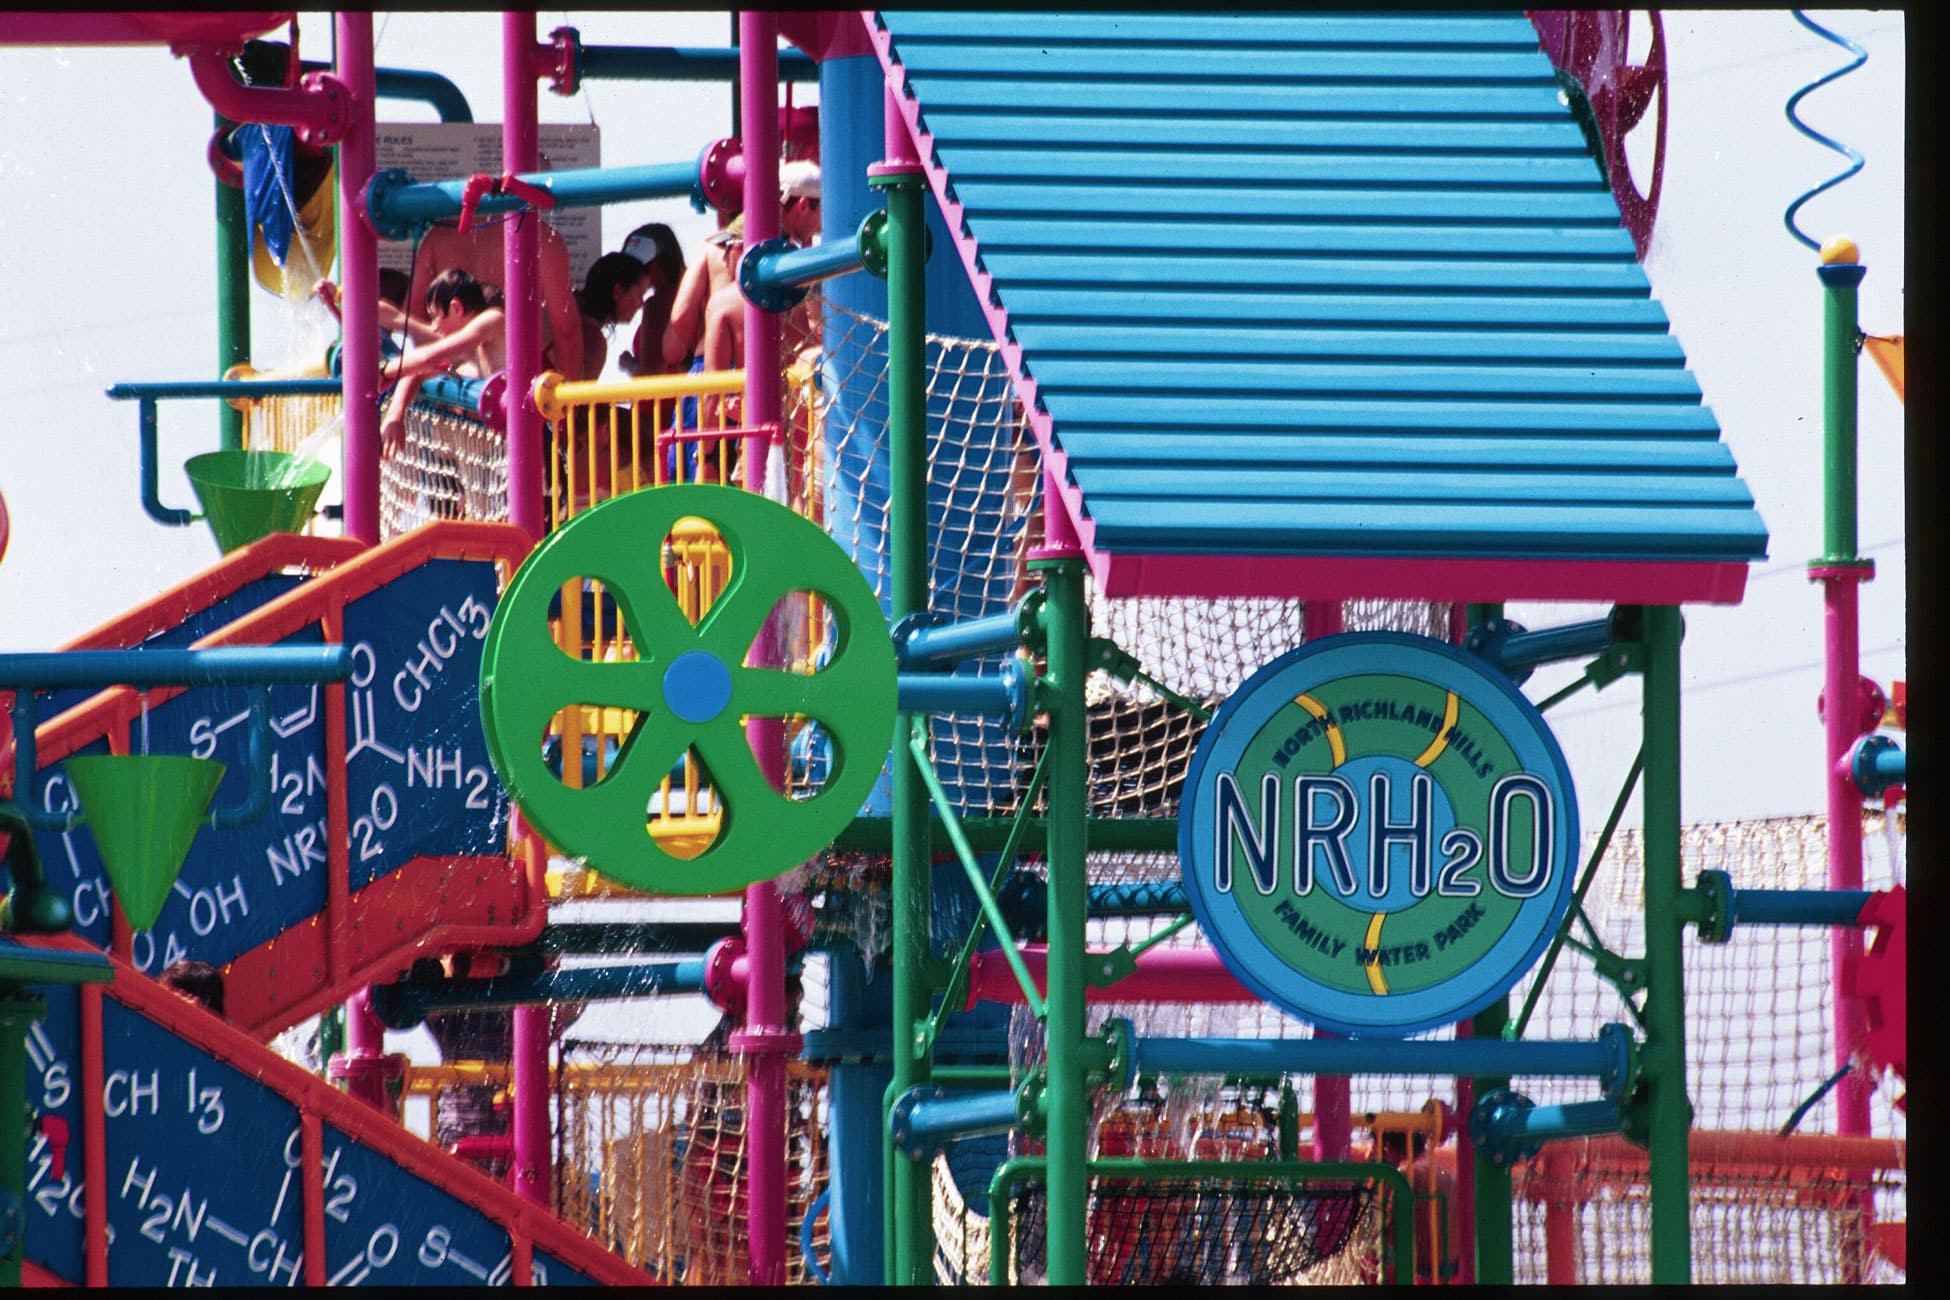 Kimley-Horn provided land development and landscape architecture services for the new themed, multi-level interactive complex at the NRH₂O water park.